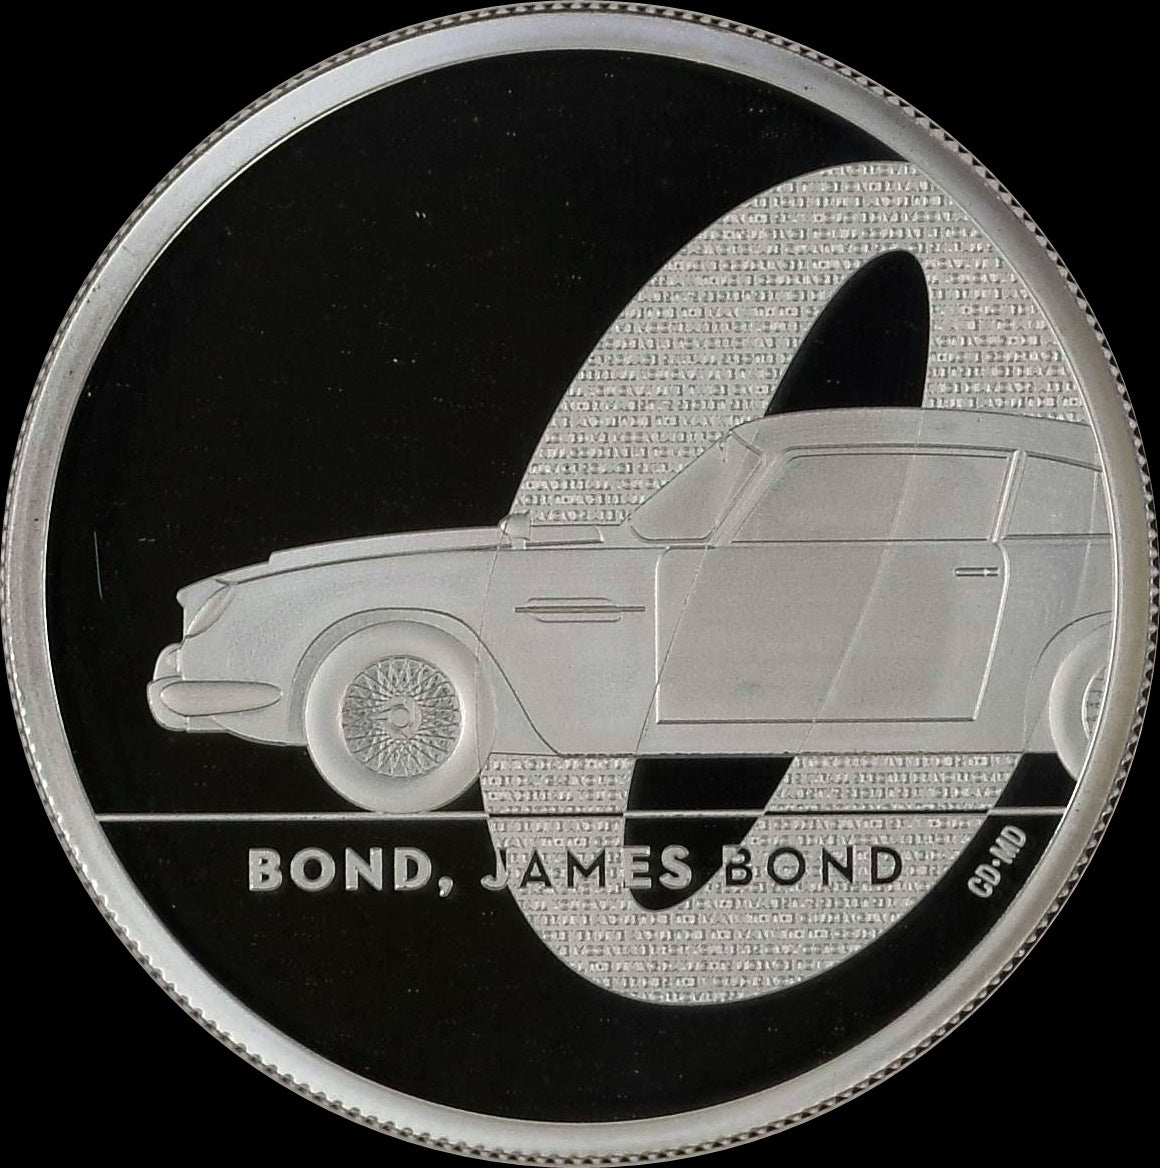 NO TIME TO DIE, James Bond series, 2 oz Silver 5£, Proof PF 69, 2020